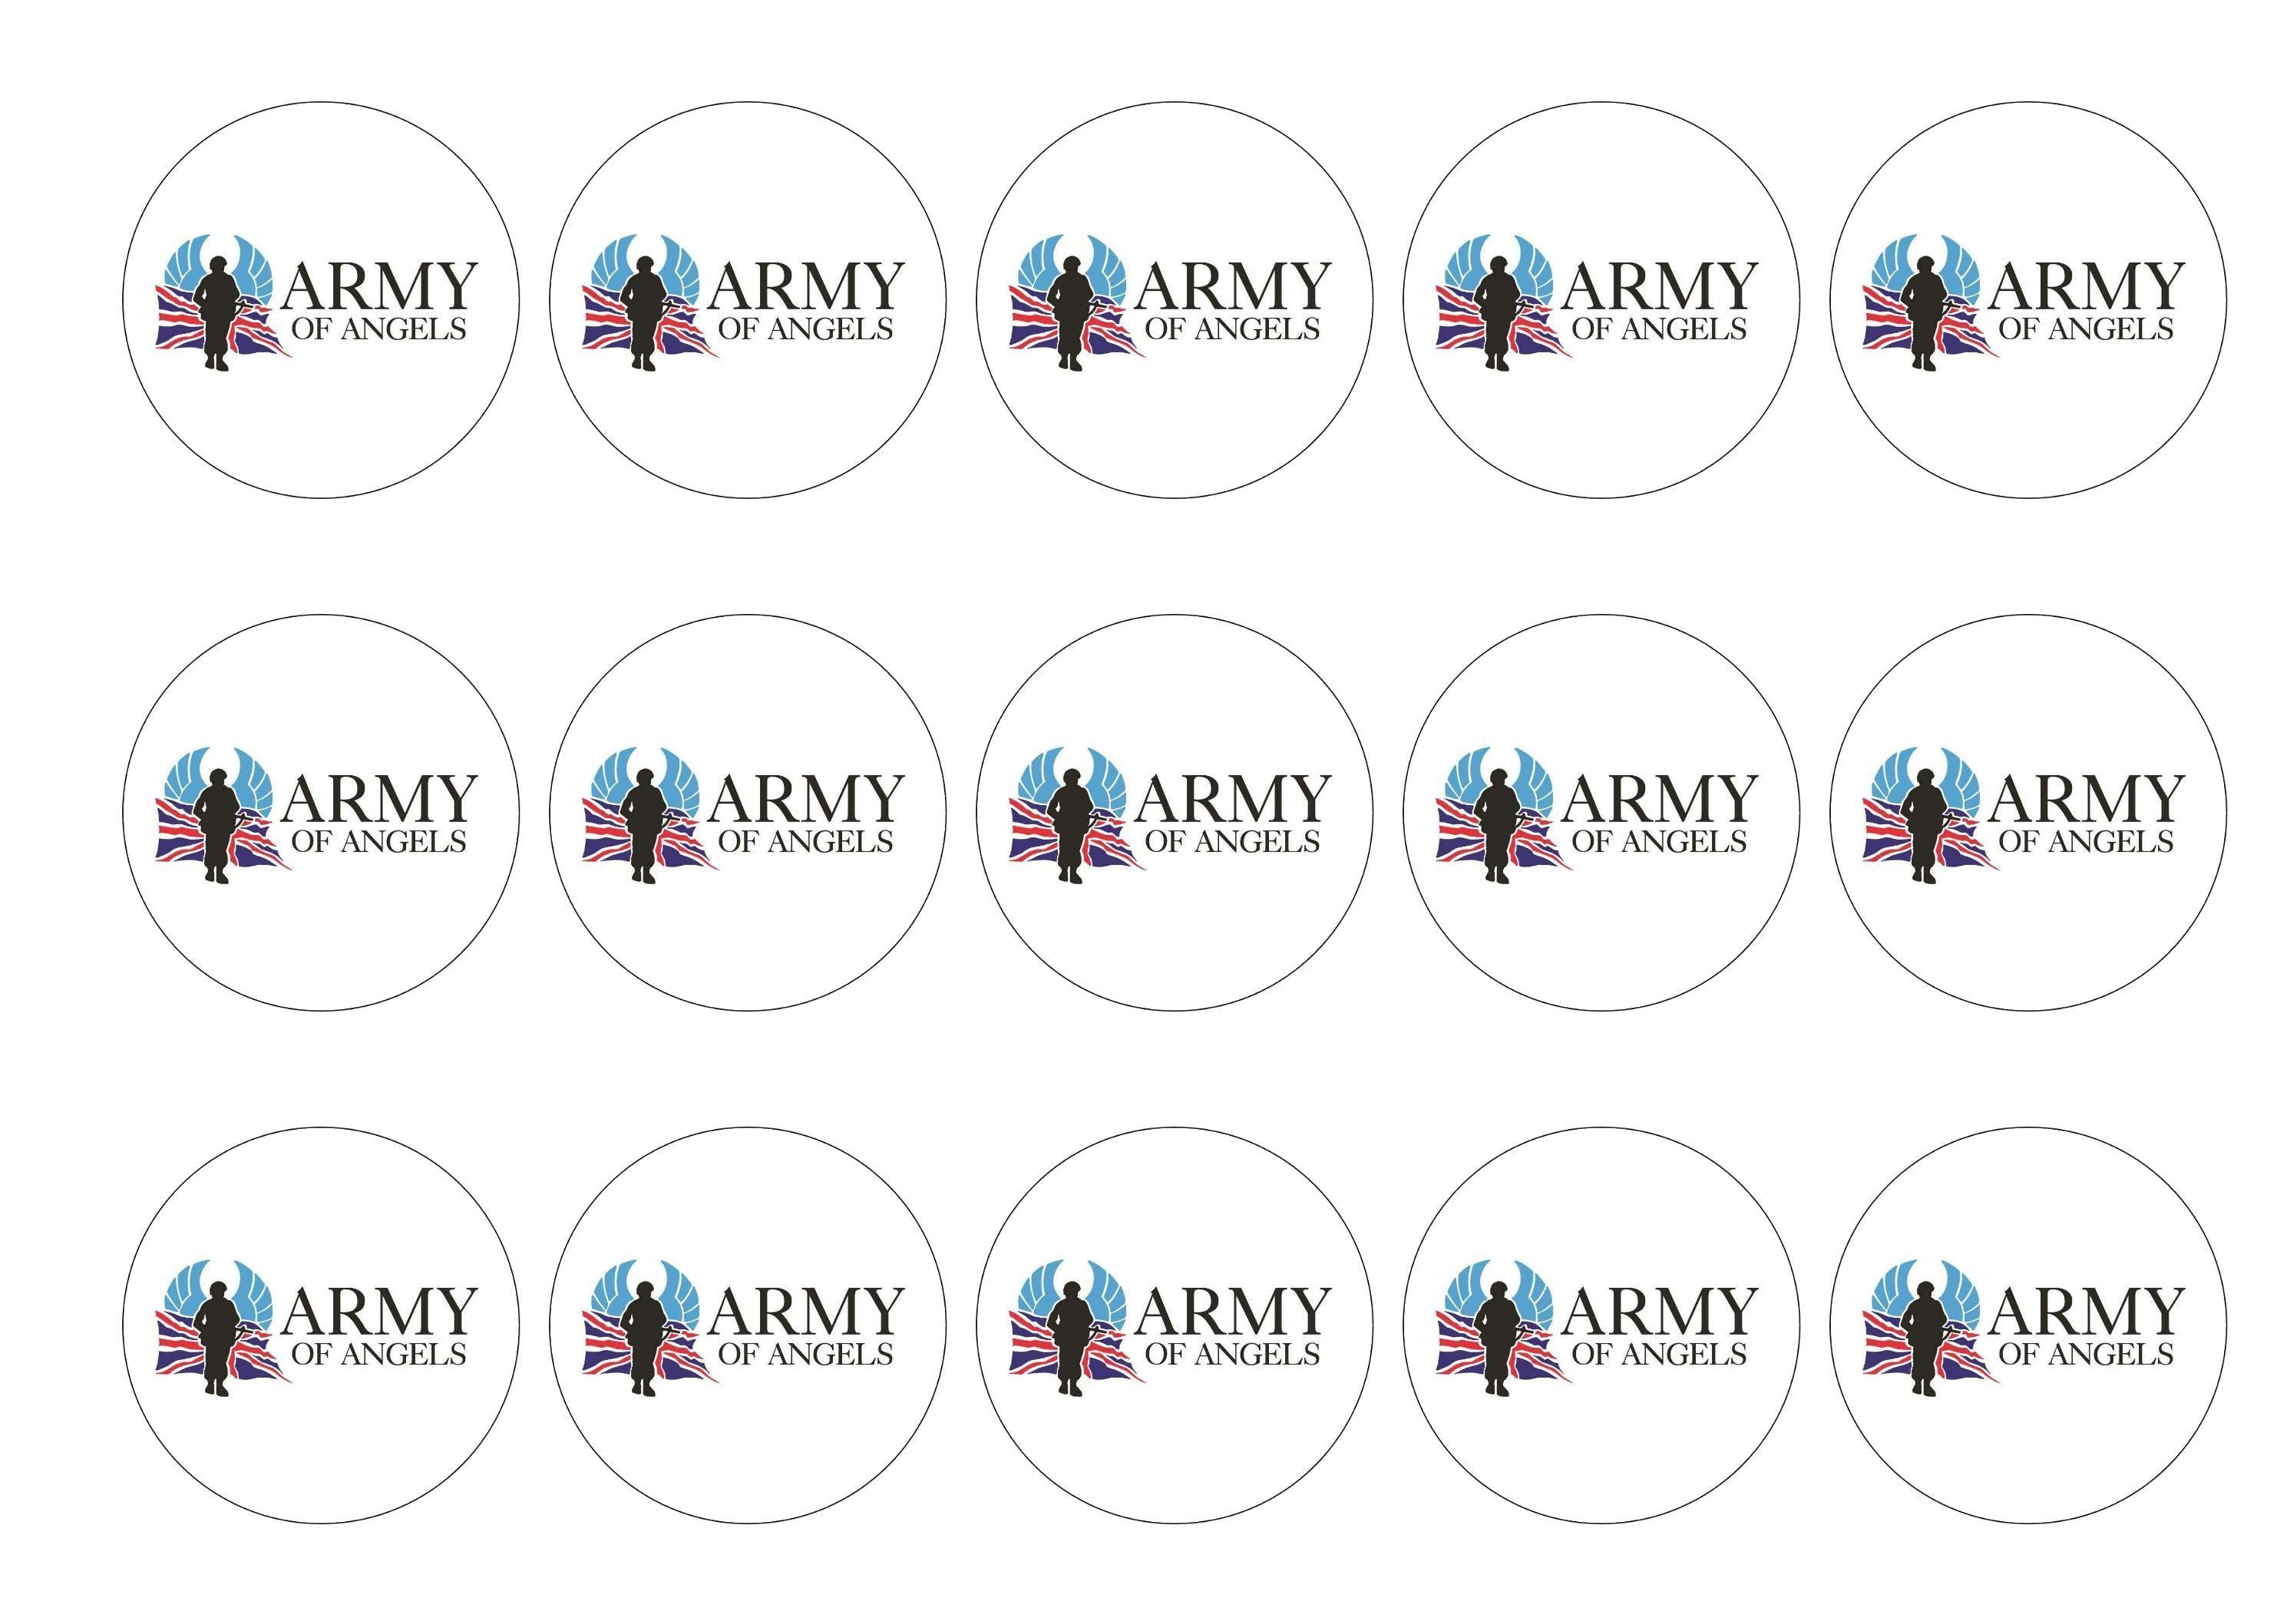 Edible printed cupcake toppers in support of Army of Angels.